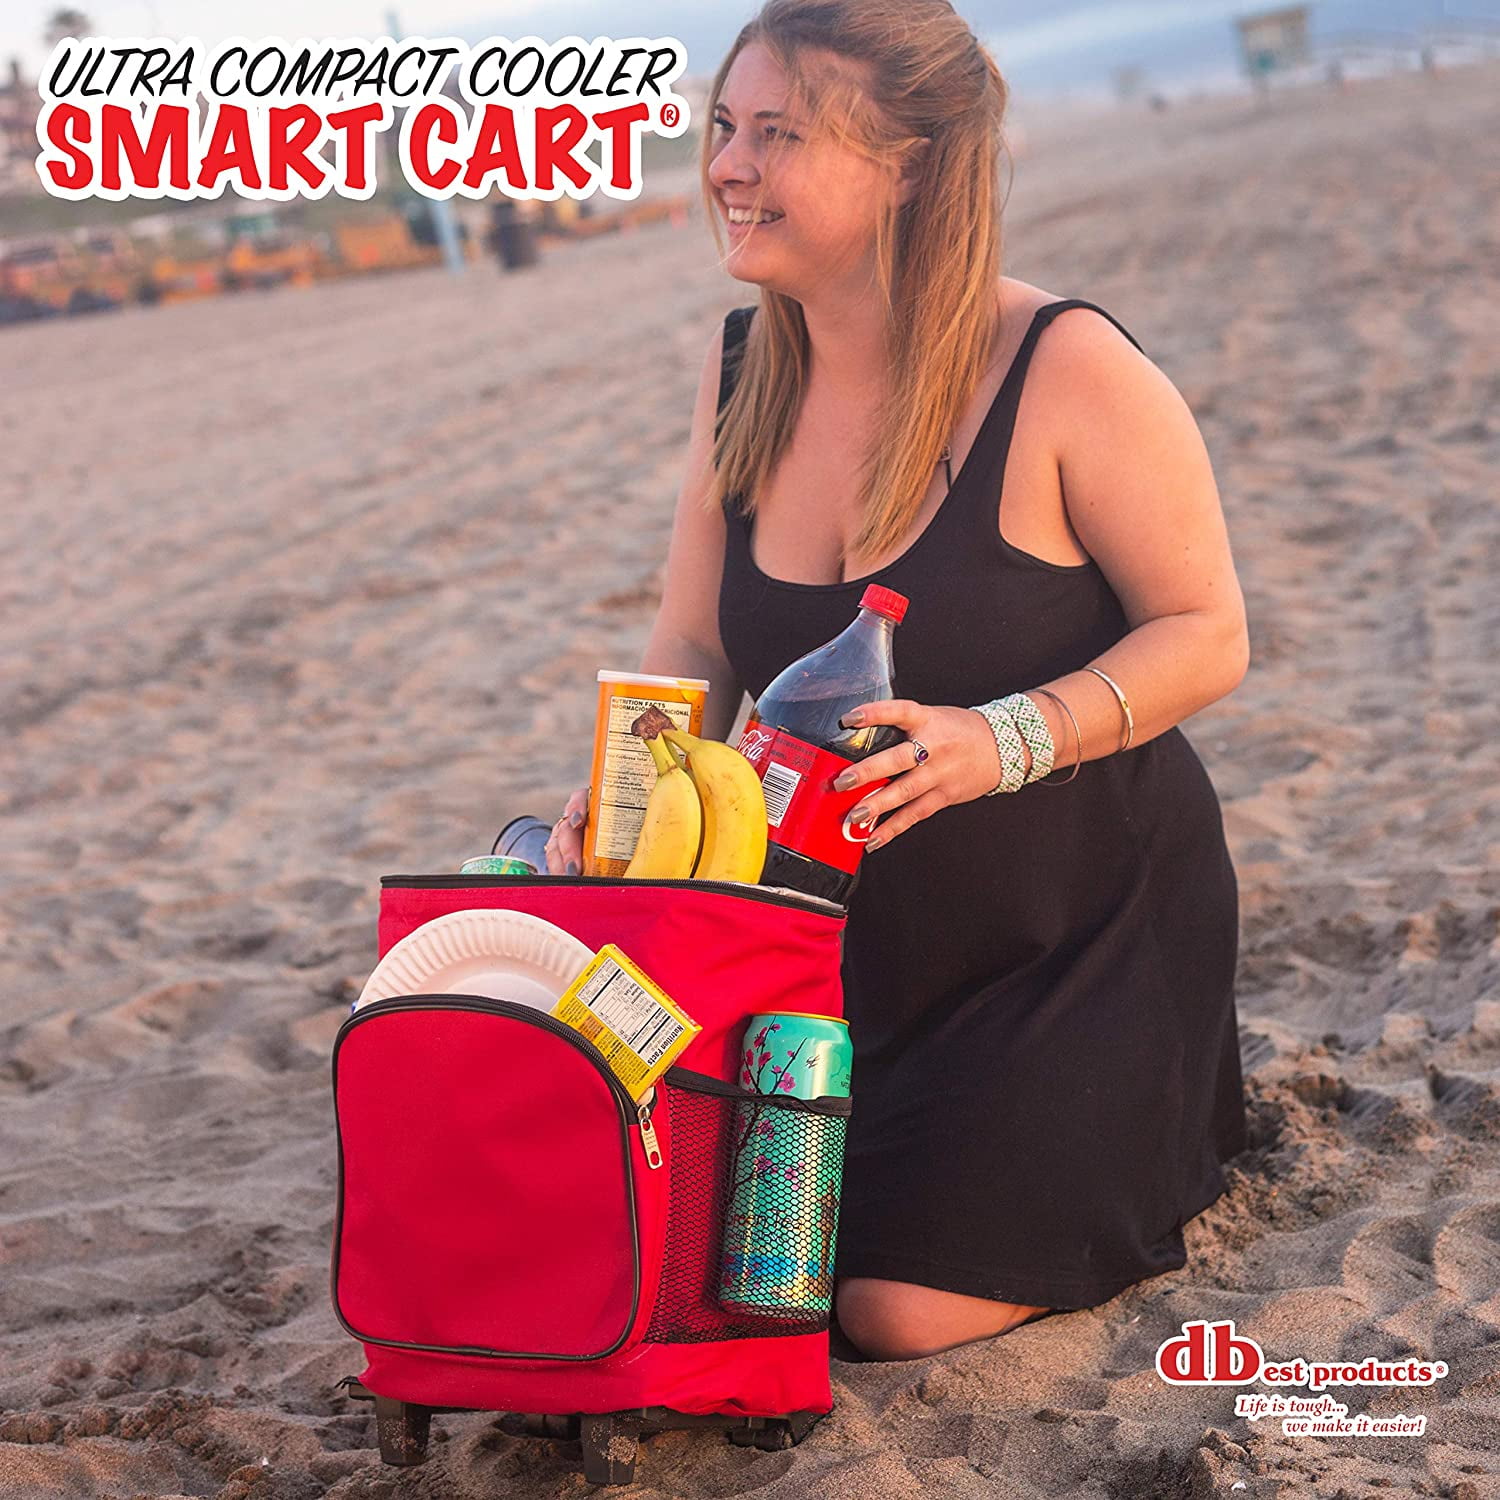 dbest products Ultra Compact Cooler Smart Cart, Red Insulated Collapsible  Rolling Tailgate BBQ Beach Summer